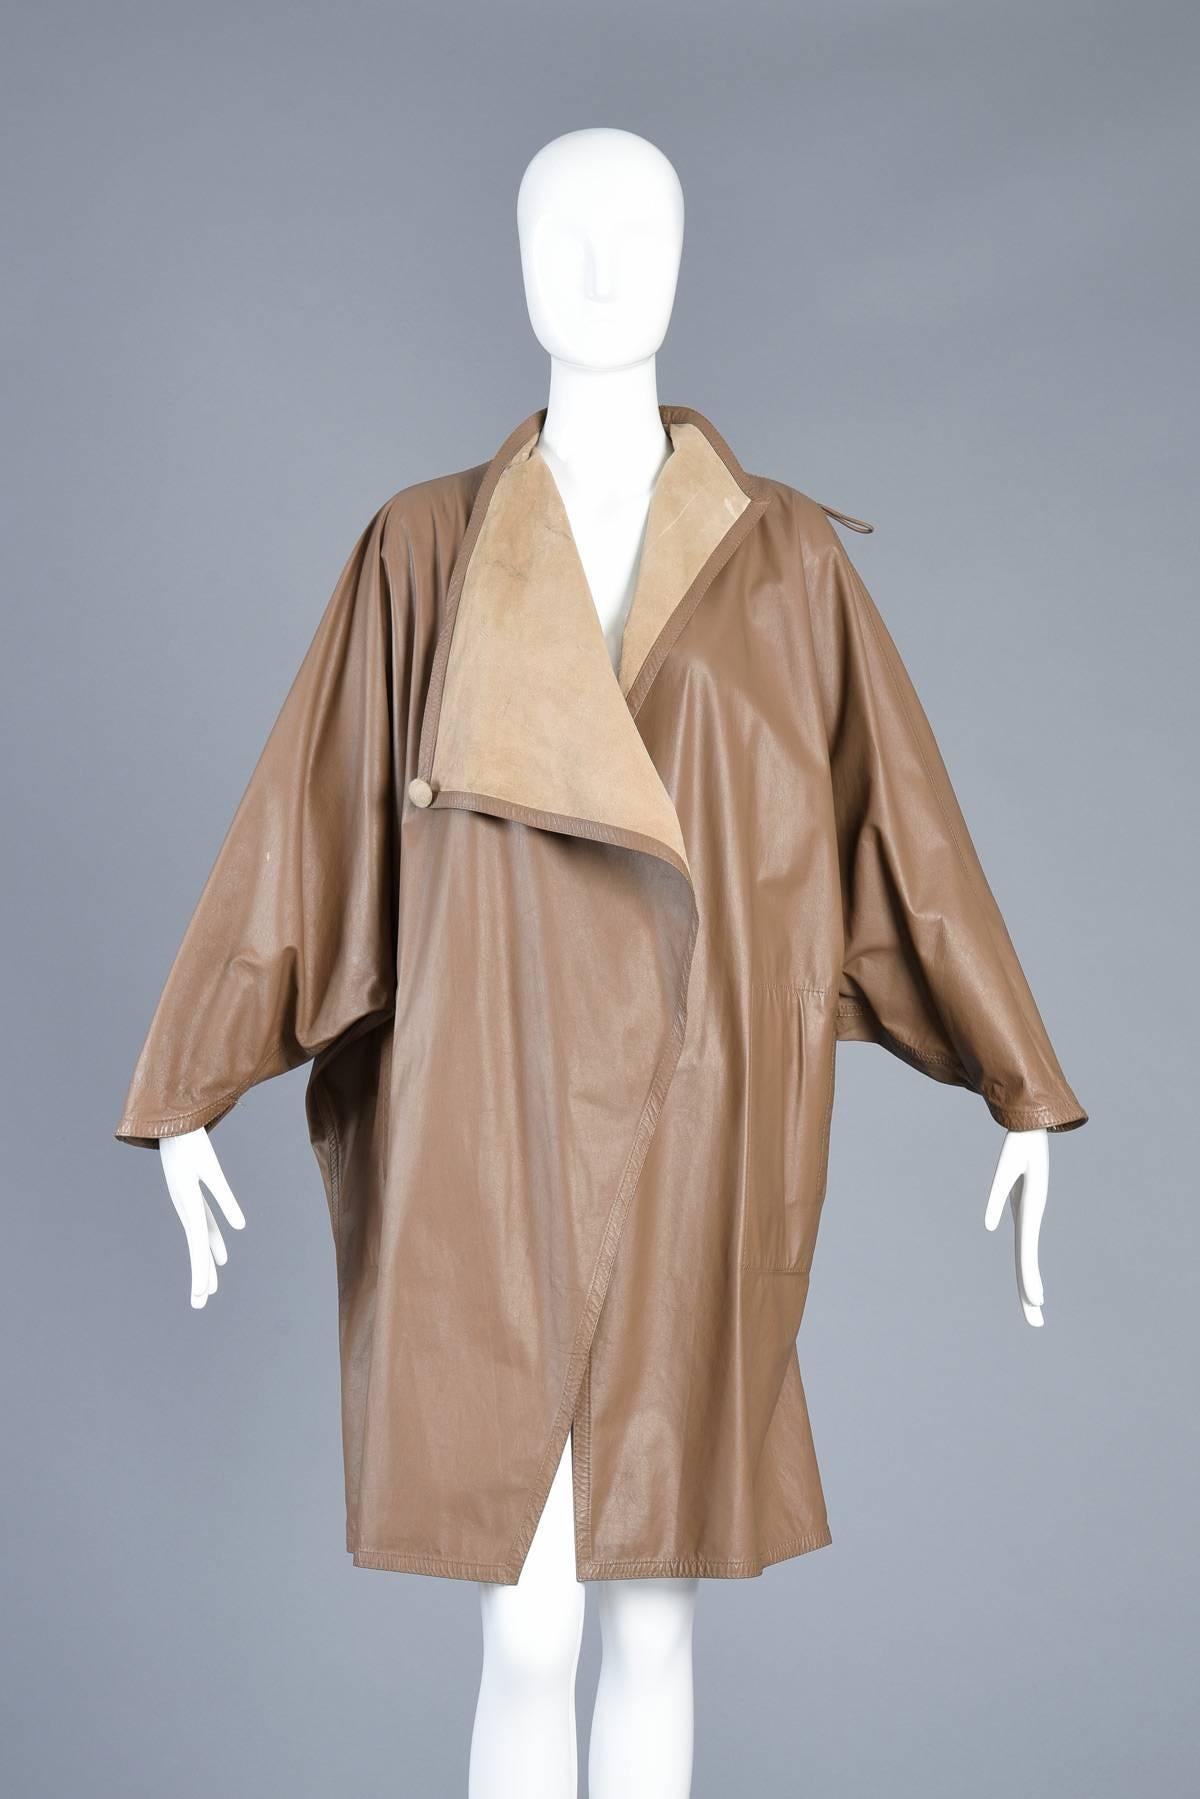 Incredible 1980s Reversible Suede Leather Avant Garde Draped Cape For Sale 2